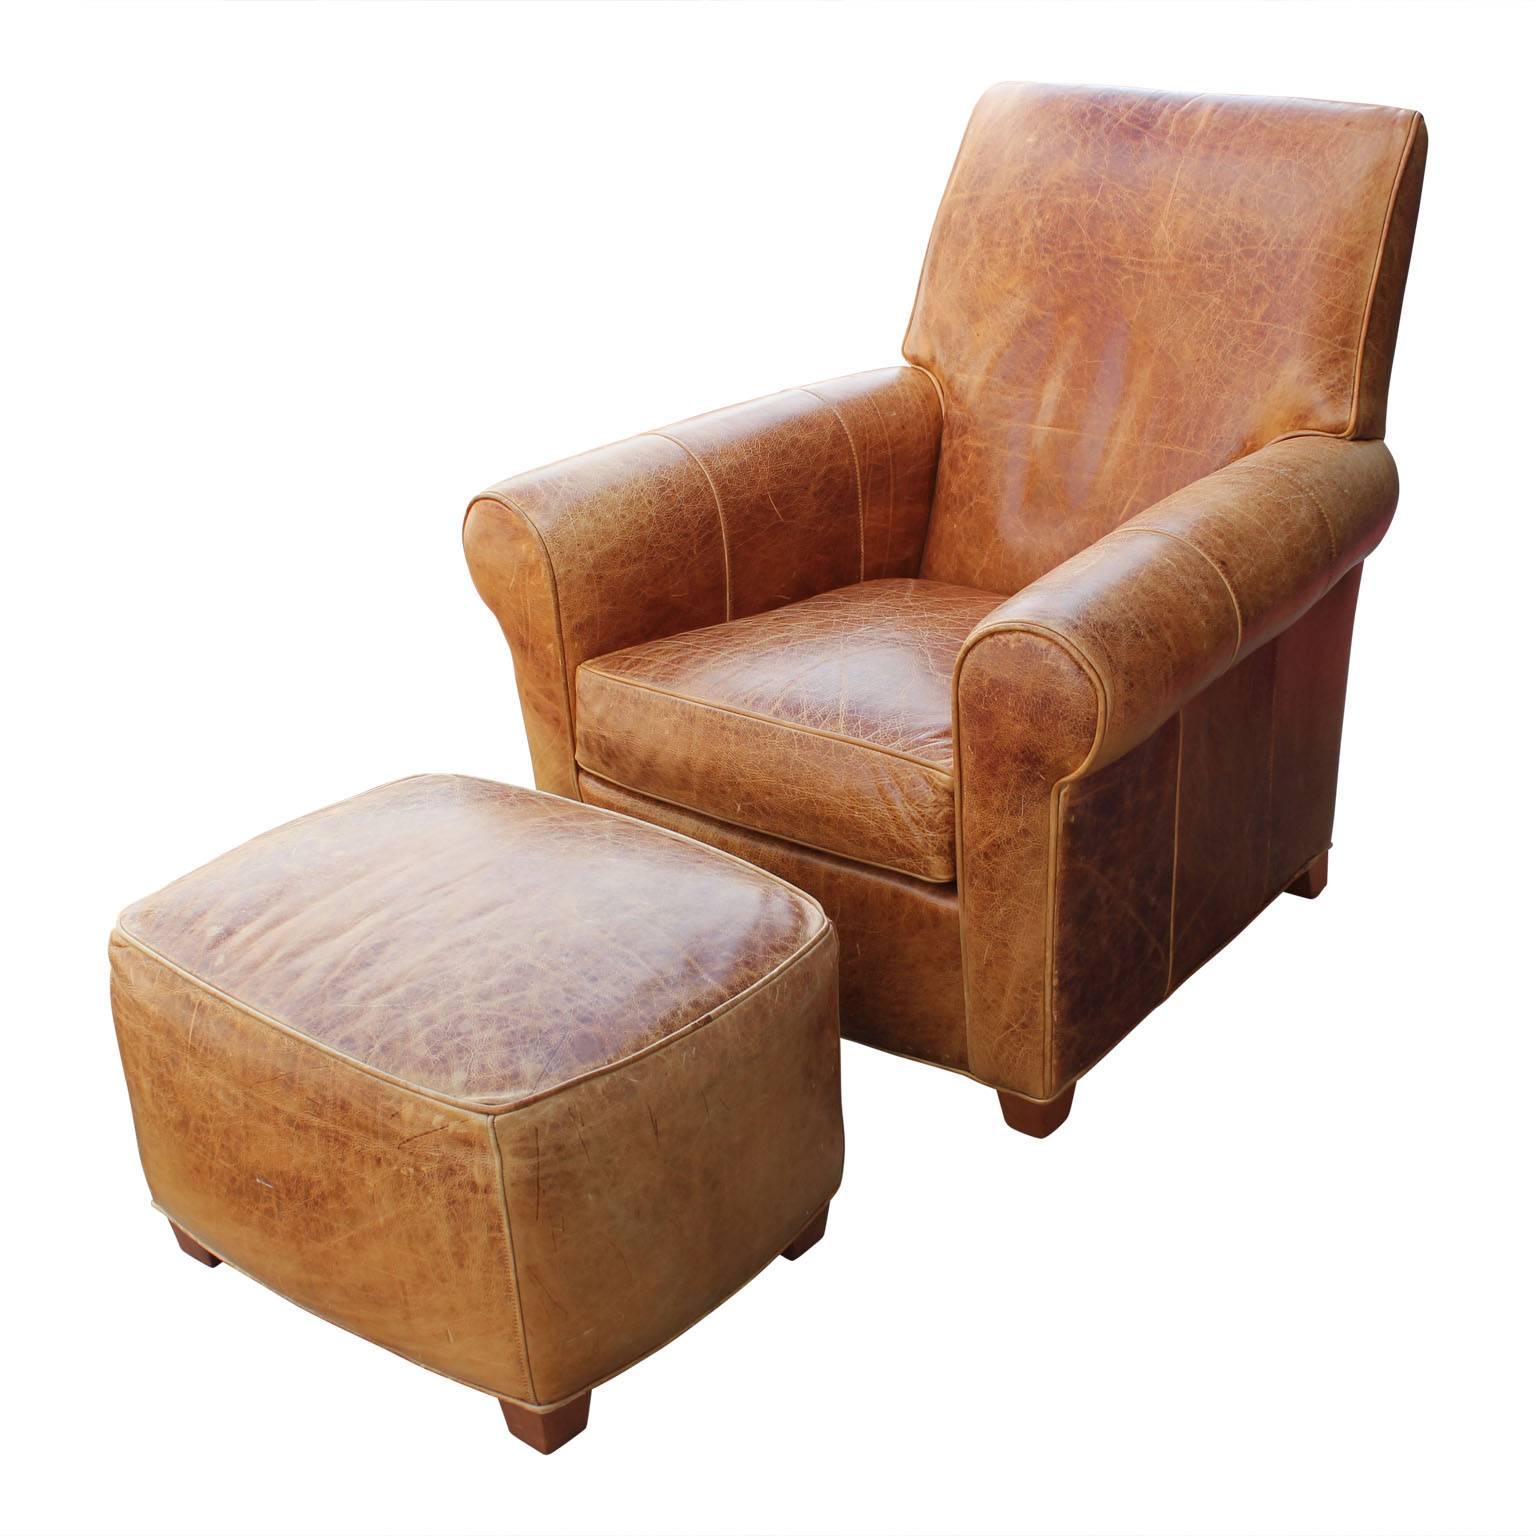 Comfy modern French Art Deco-style brown leather lounge chair and ottoman. 

Ottoman dimensions: 26 in. W x 20 in. D x 16 in. H.